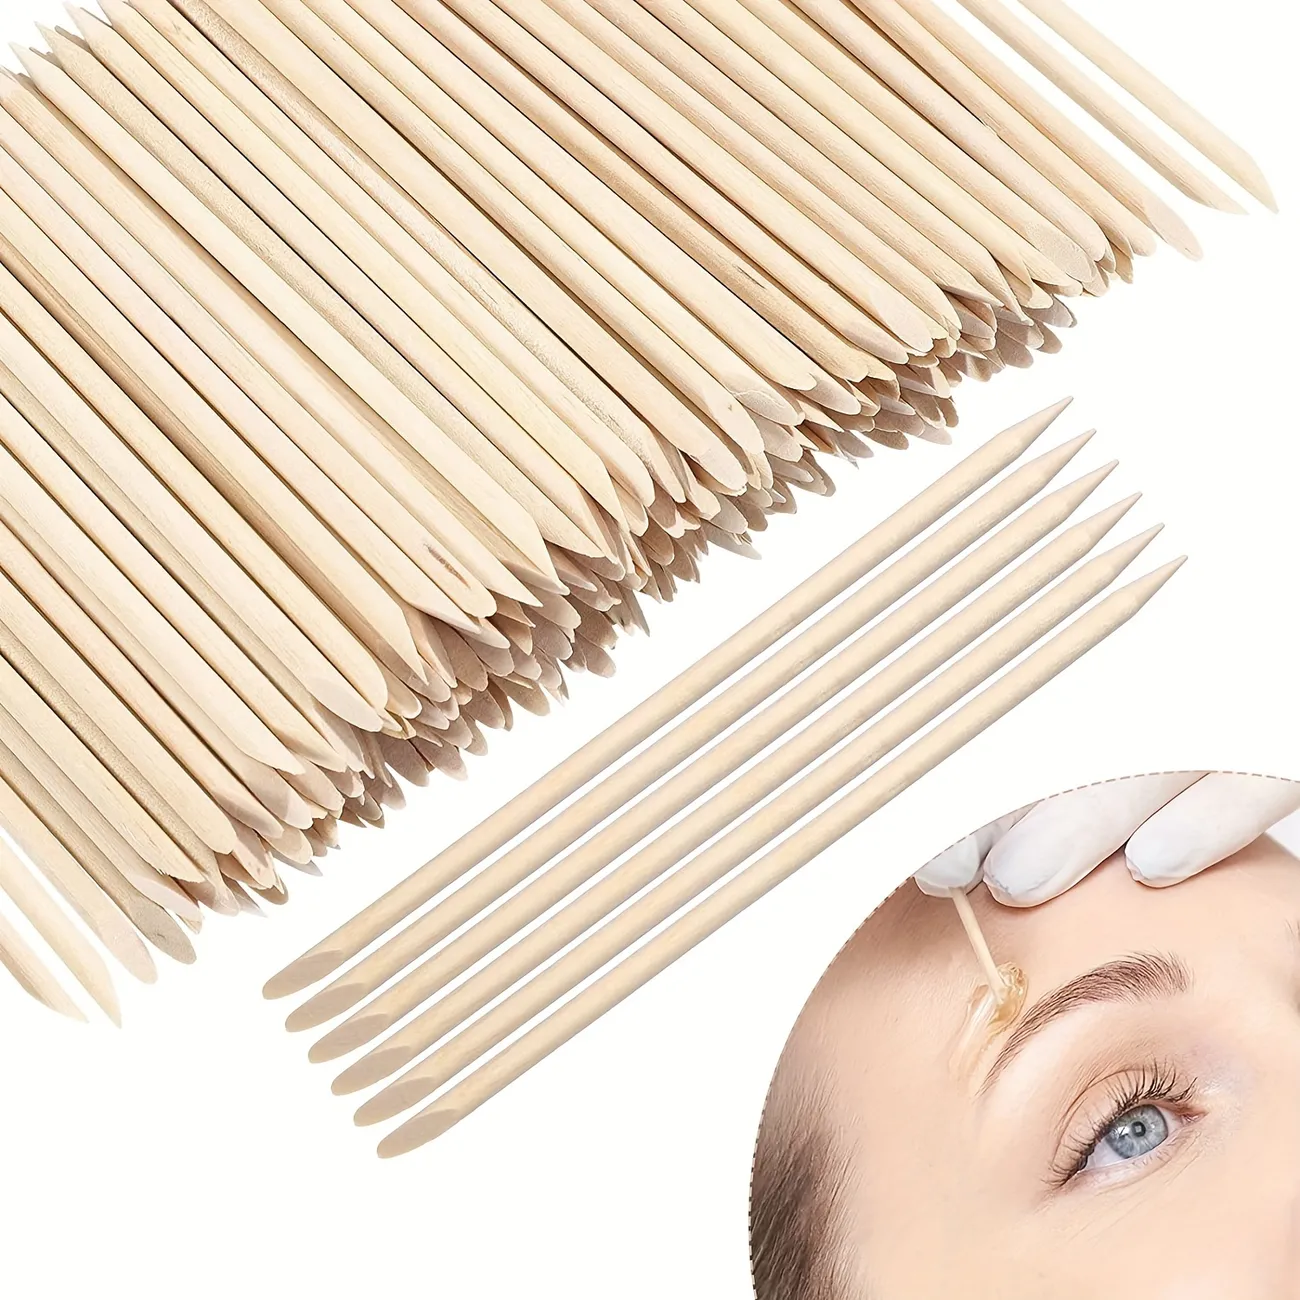 Wooden Waxing Sticks | Precision Hair Removal